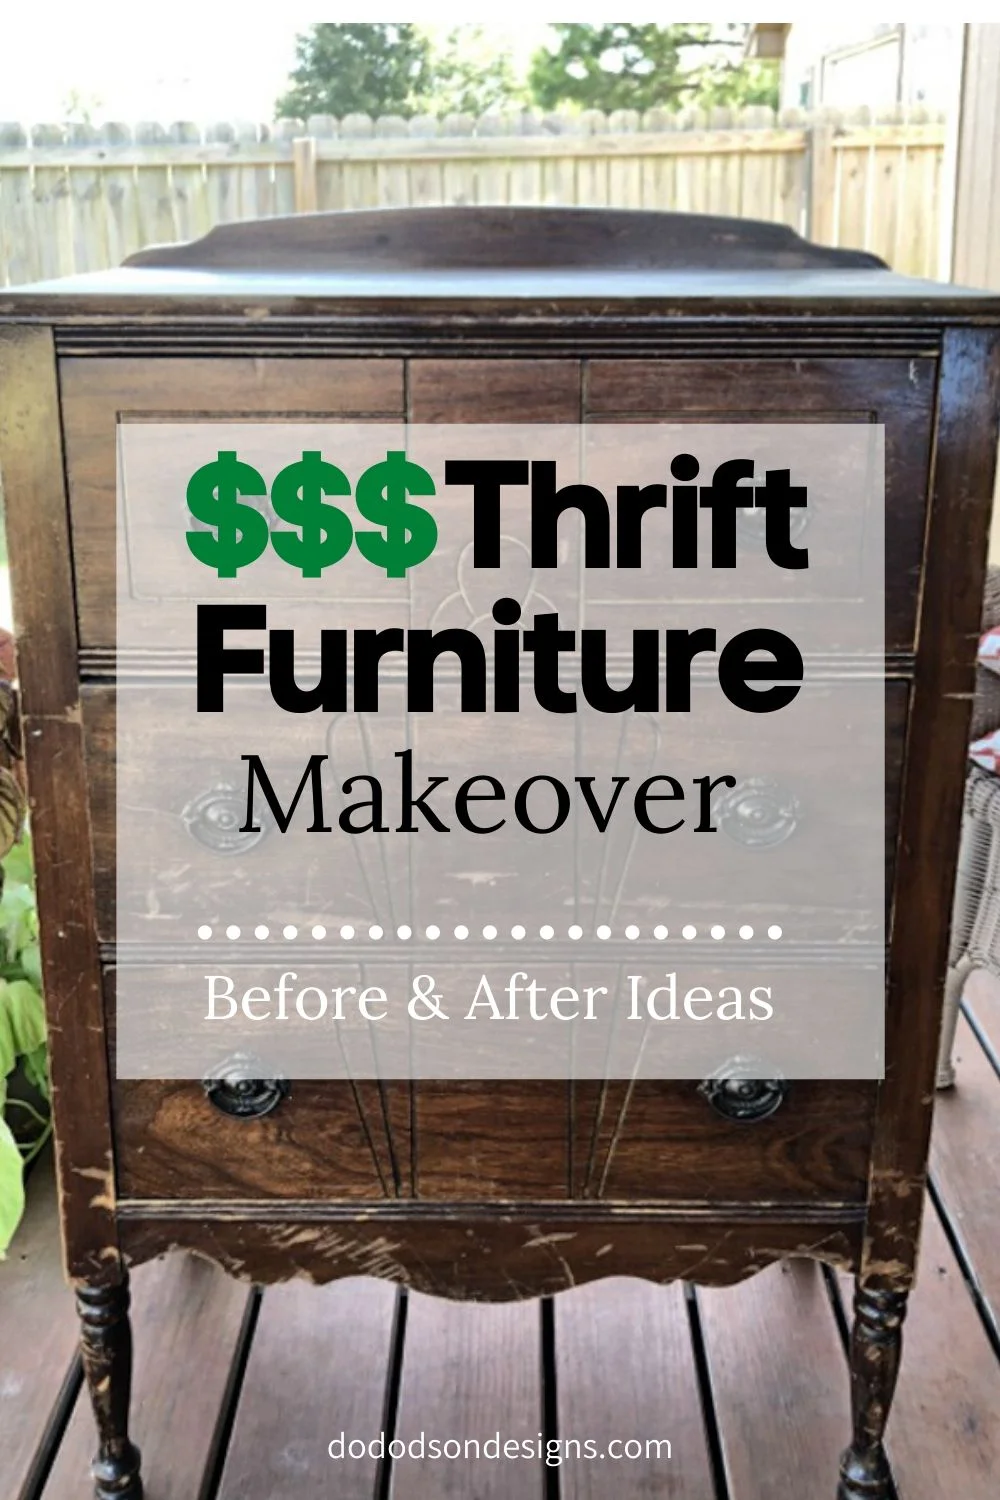 Easy Thrift Furniture Makeover That Will Save You Money $$$